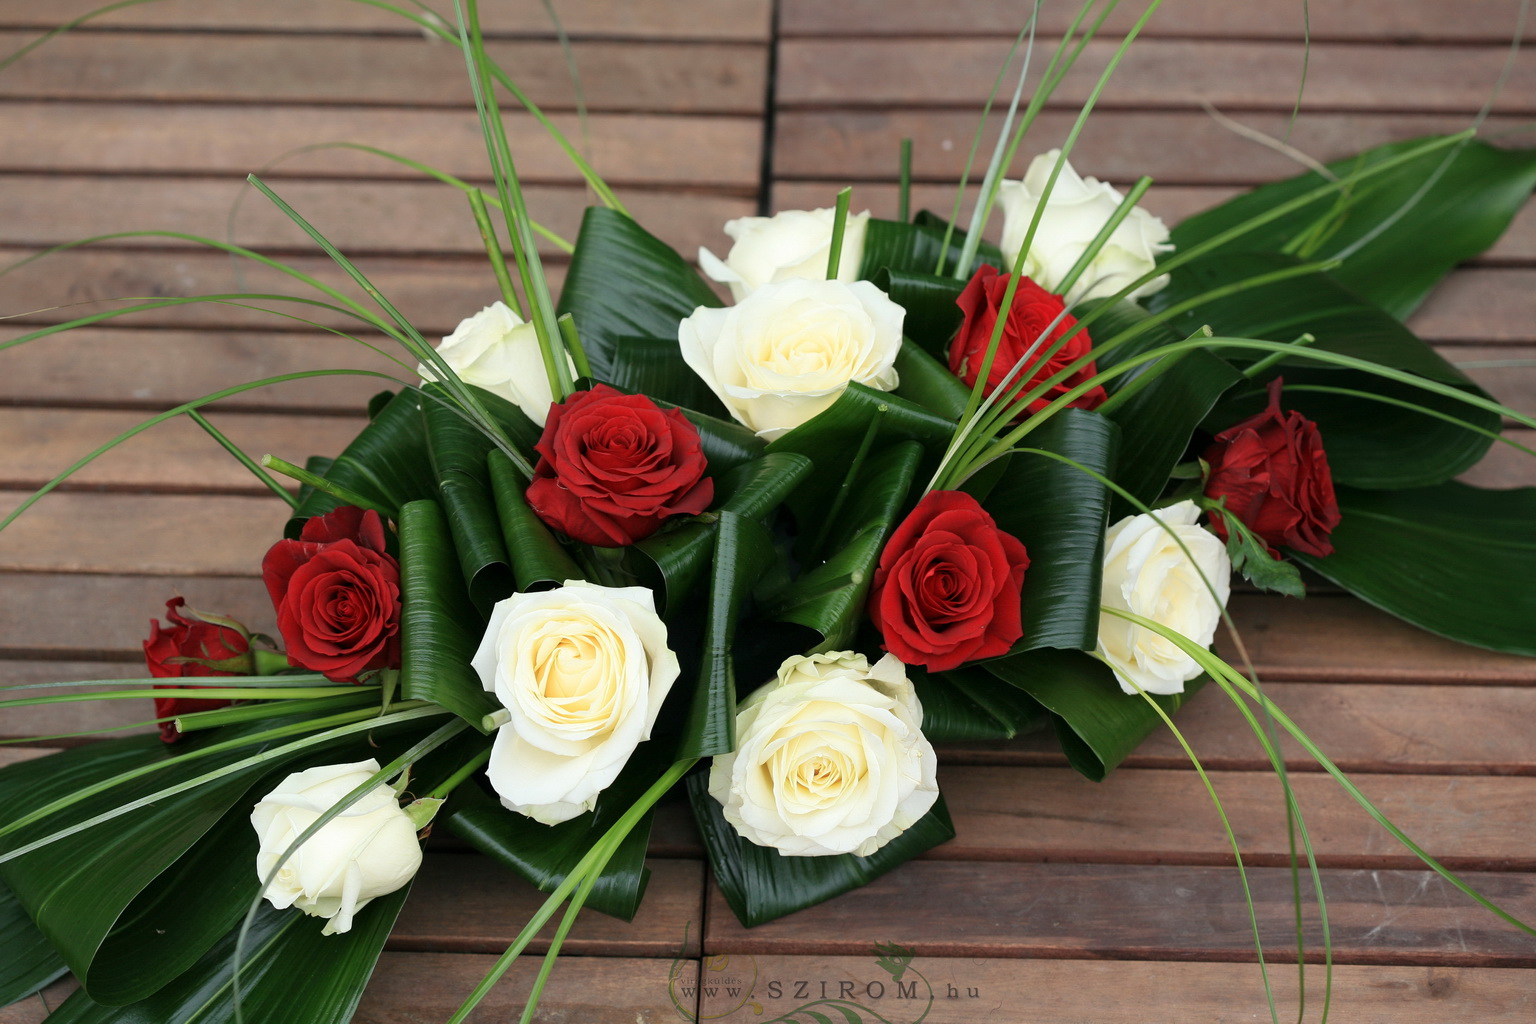 flower delivery Budapest - Main table centerpiece (roses, red, white), wedding